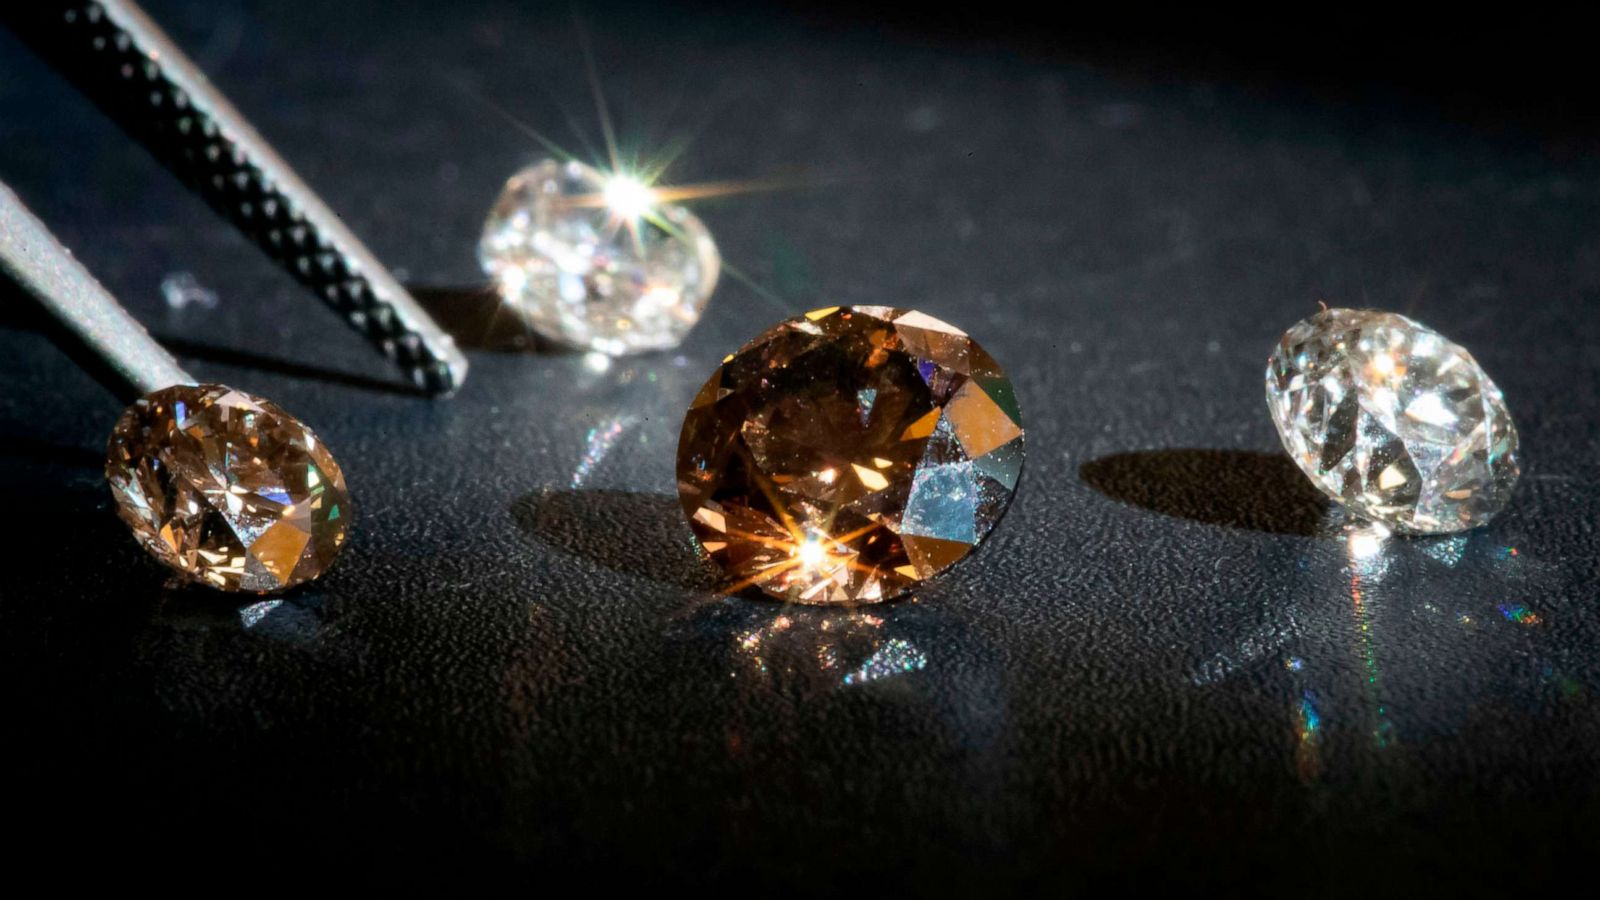 Large Uncut Diamond Stone In A Natural State Within A Mine Concept